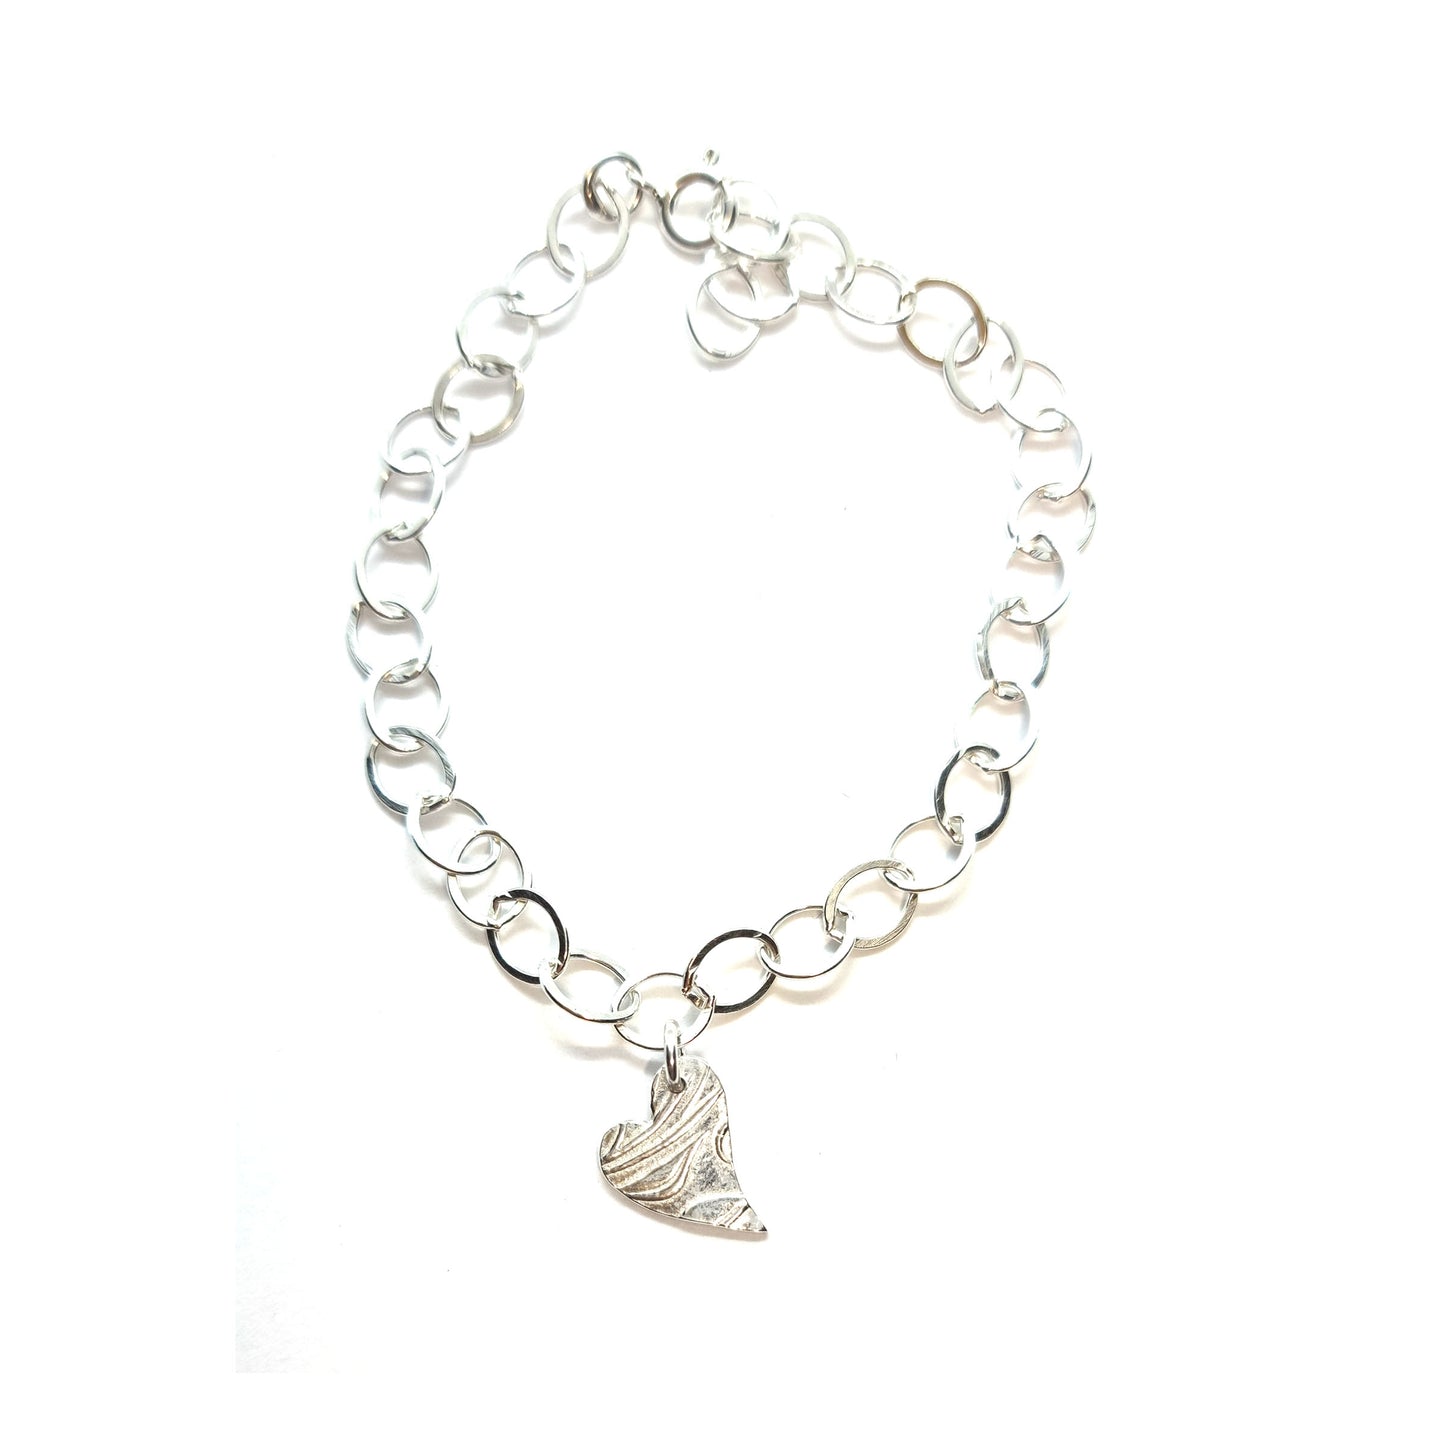 Silver large link chain bracelet with asymmetrical patterned heart charm.